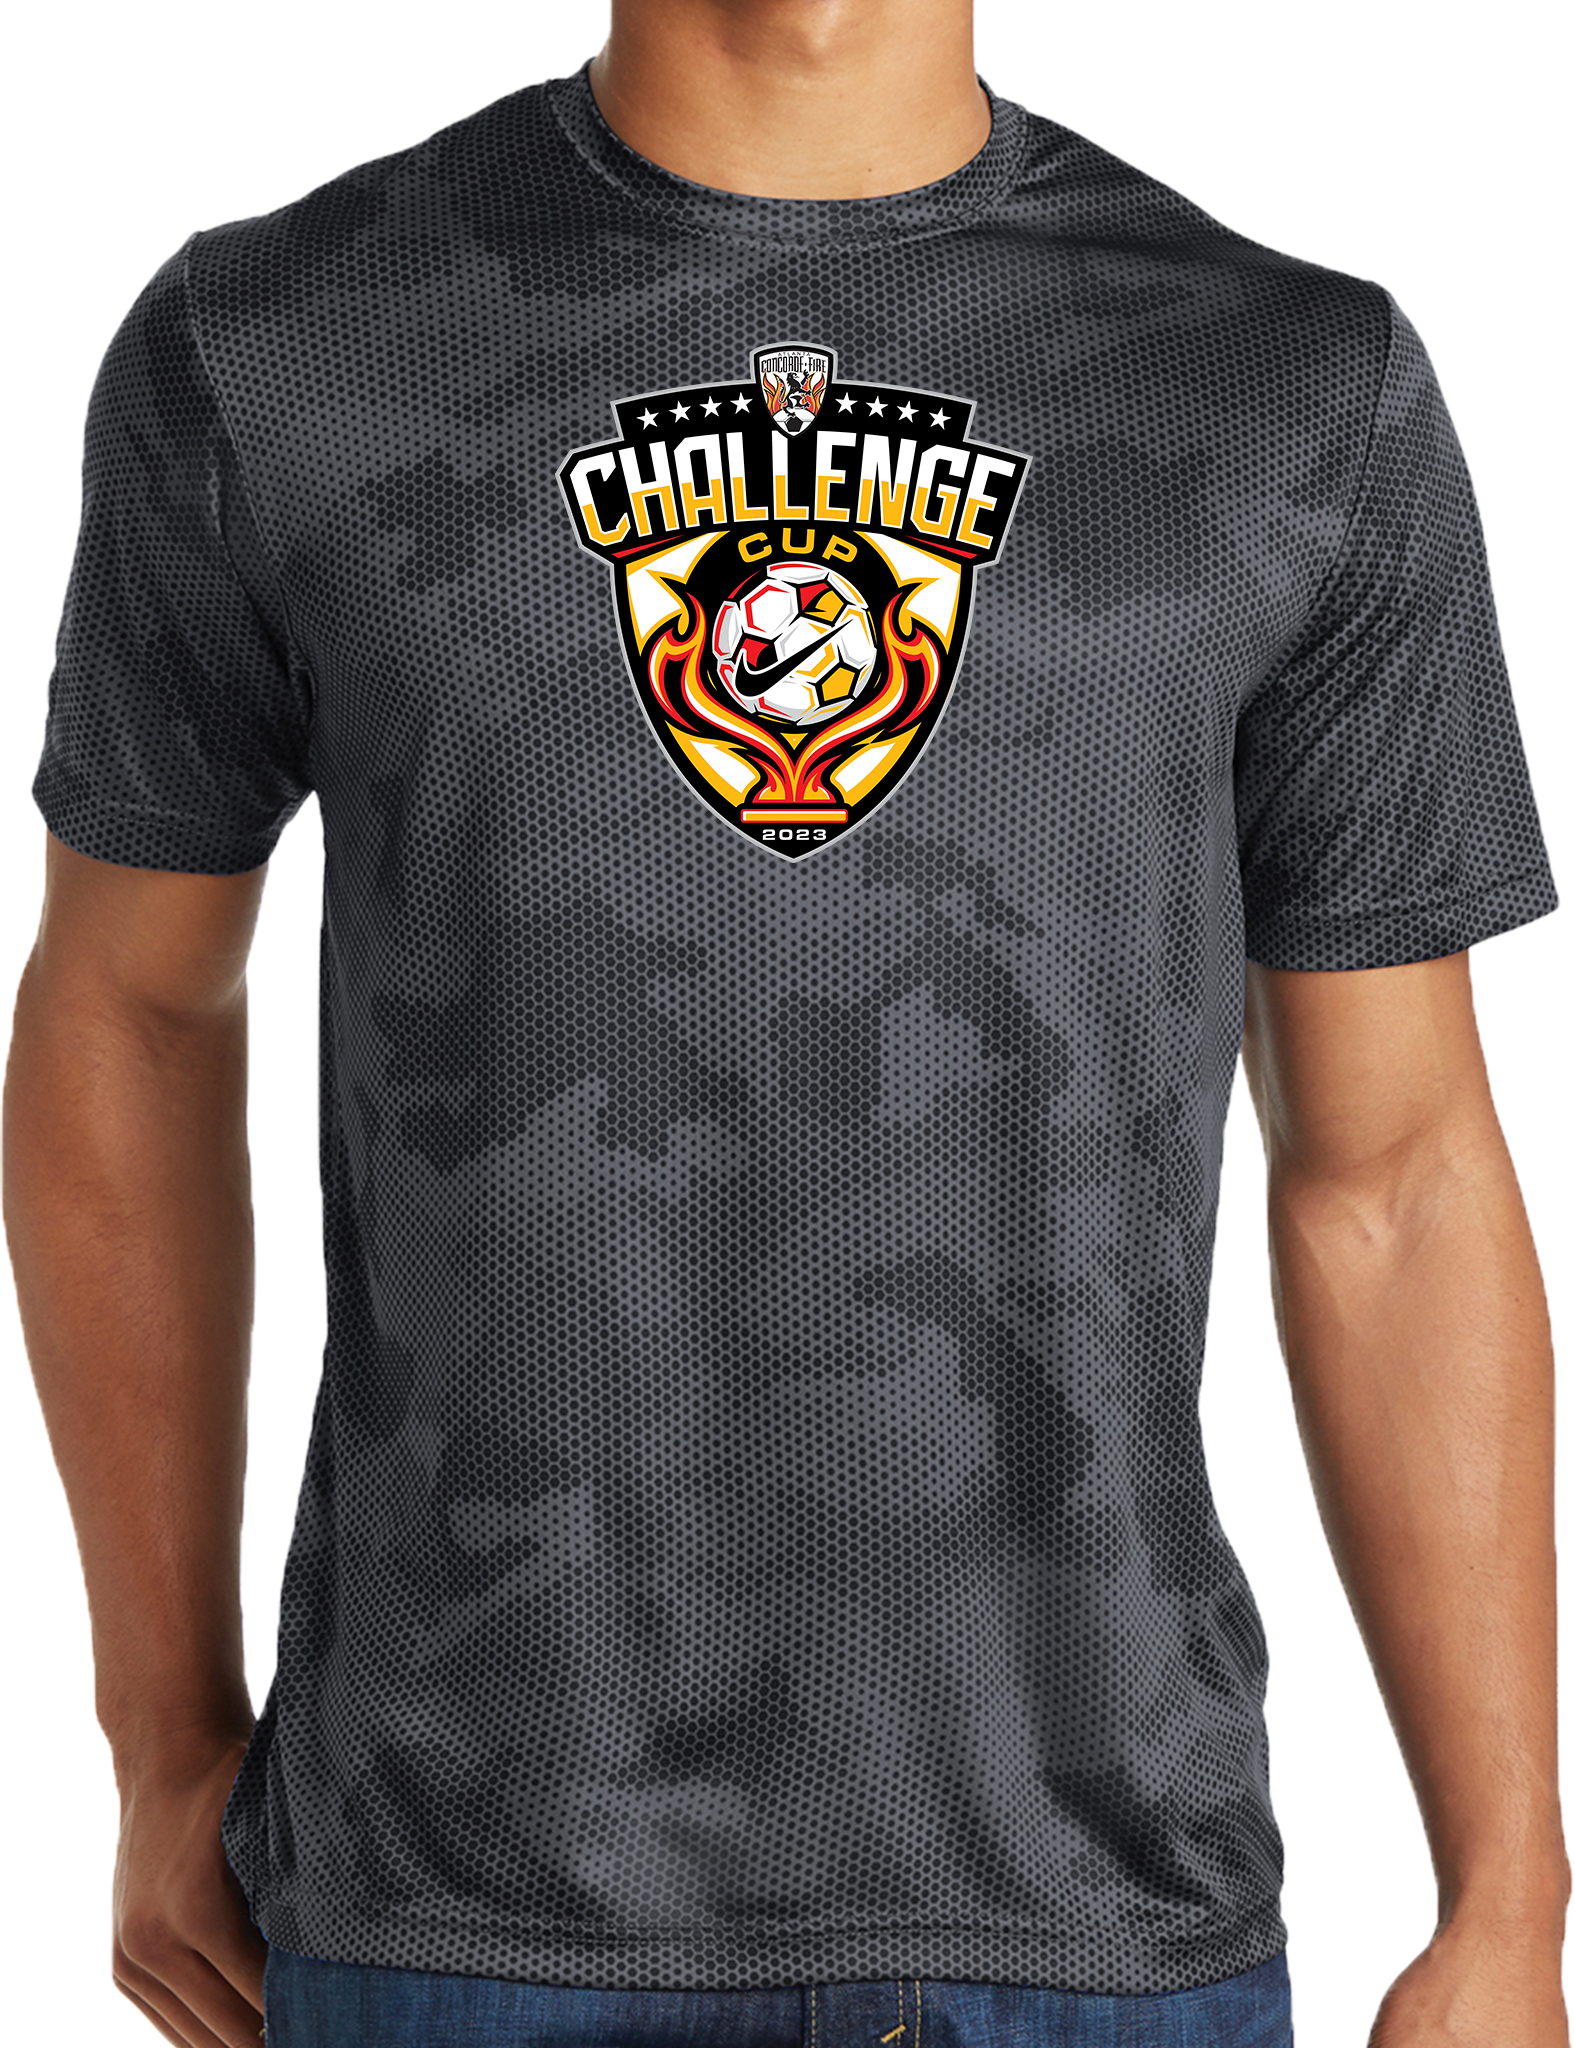 PERFORMANCE SHIRTS - 2023 Challenge Cup